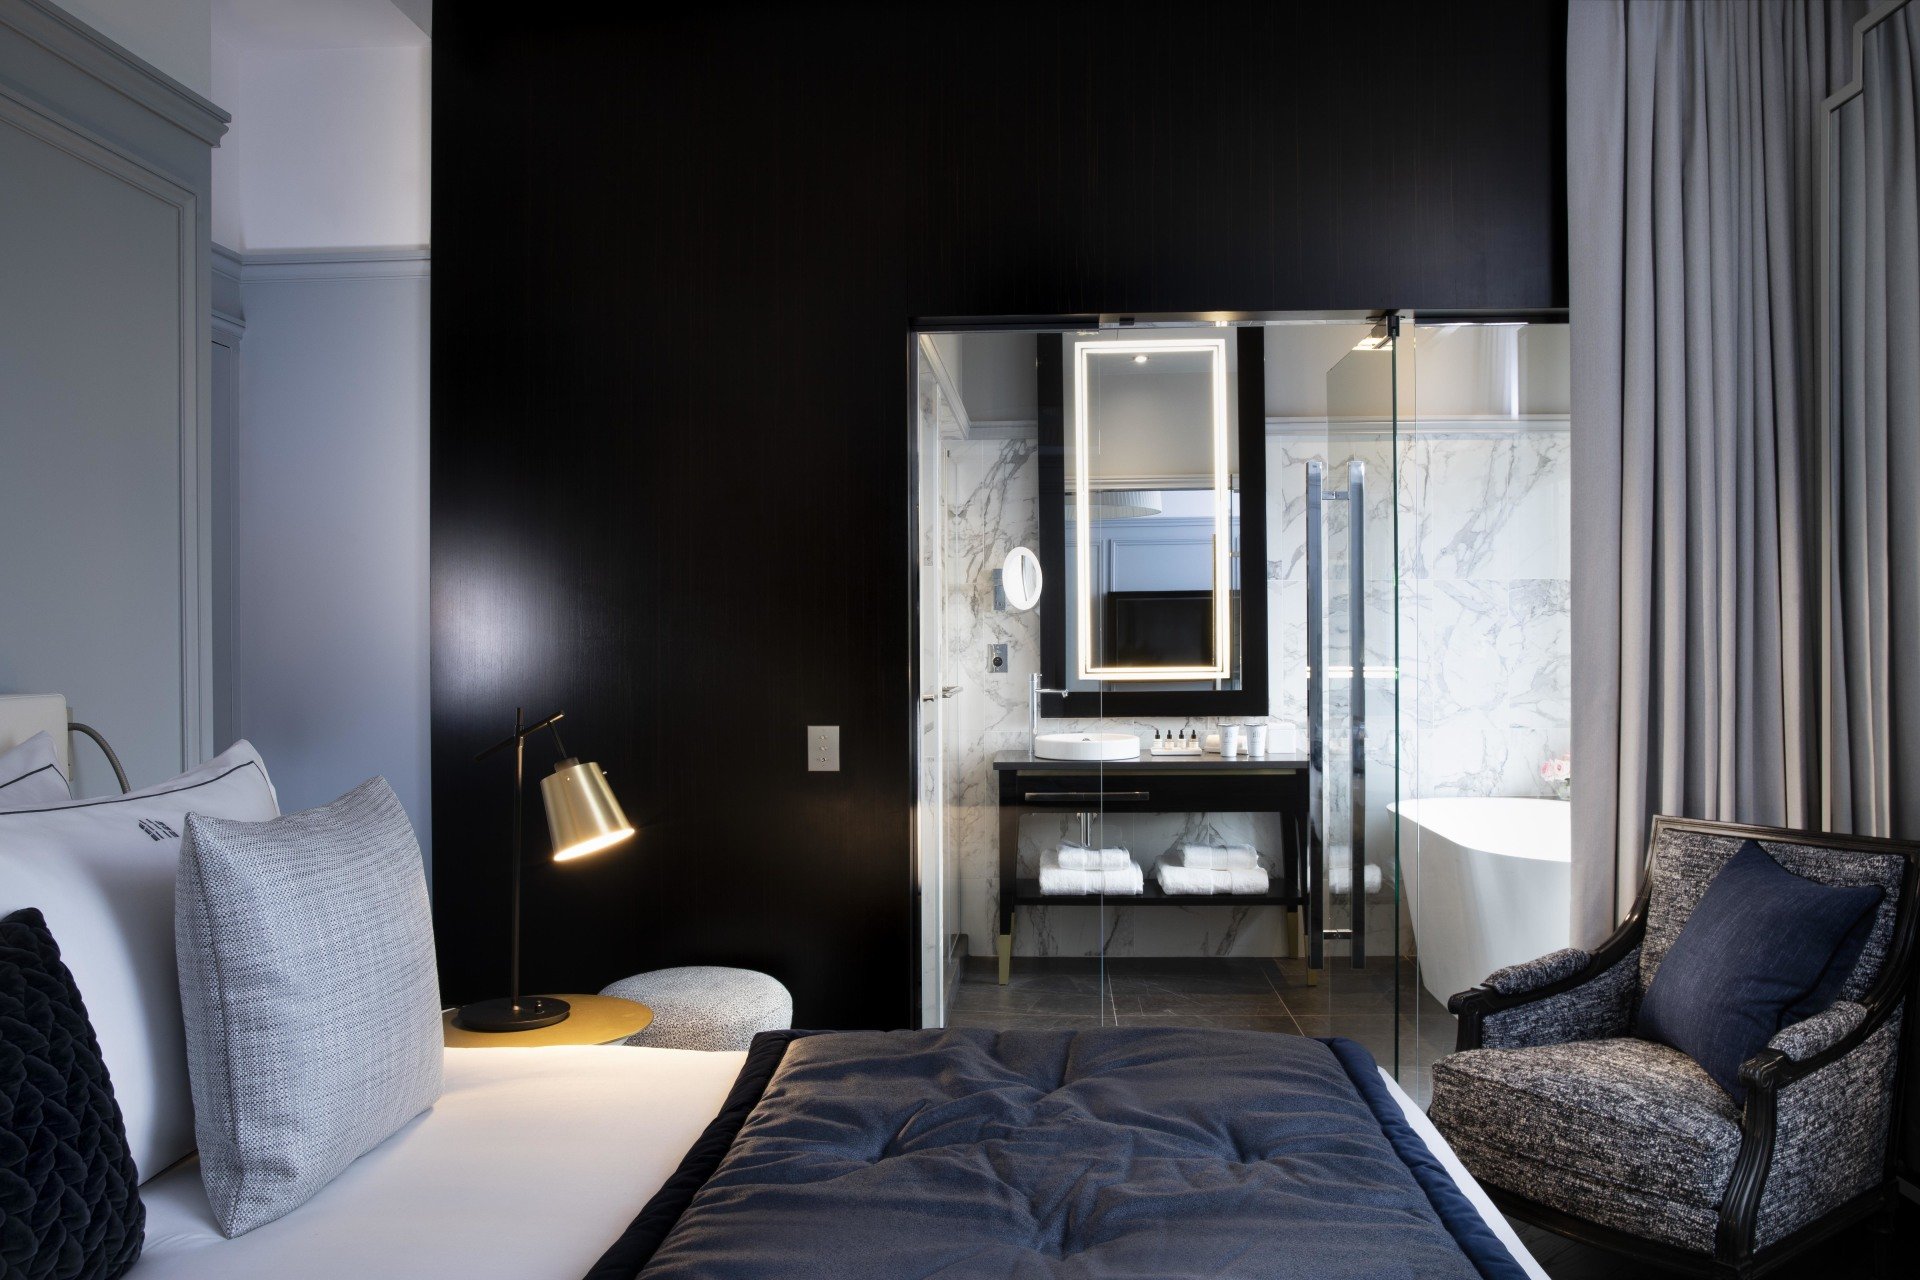 Hotel and Spa Le Damantin Paris - luxury hotel designed by the interior design studio jean-philippe nuel - design room equipped with bed, design armchair, open bathroom